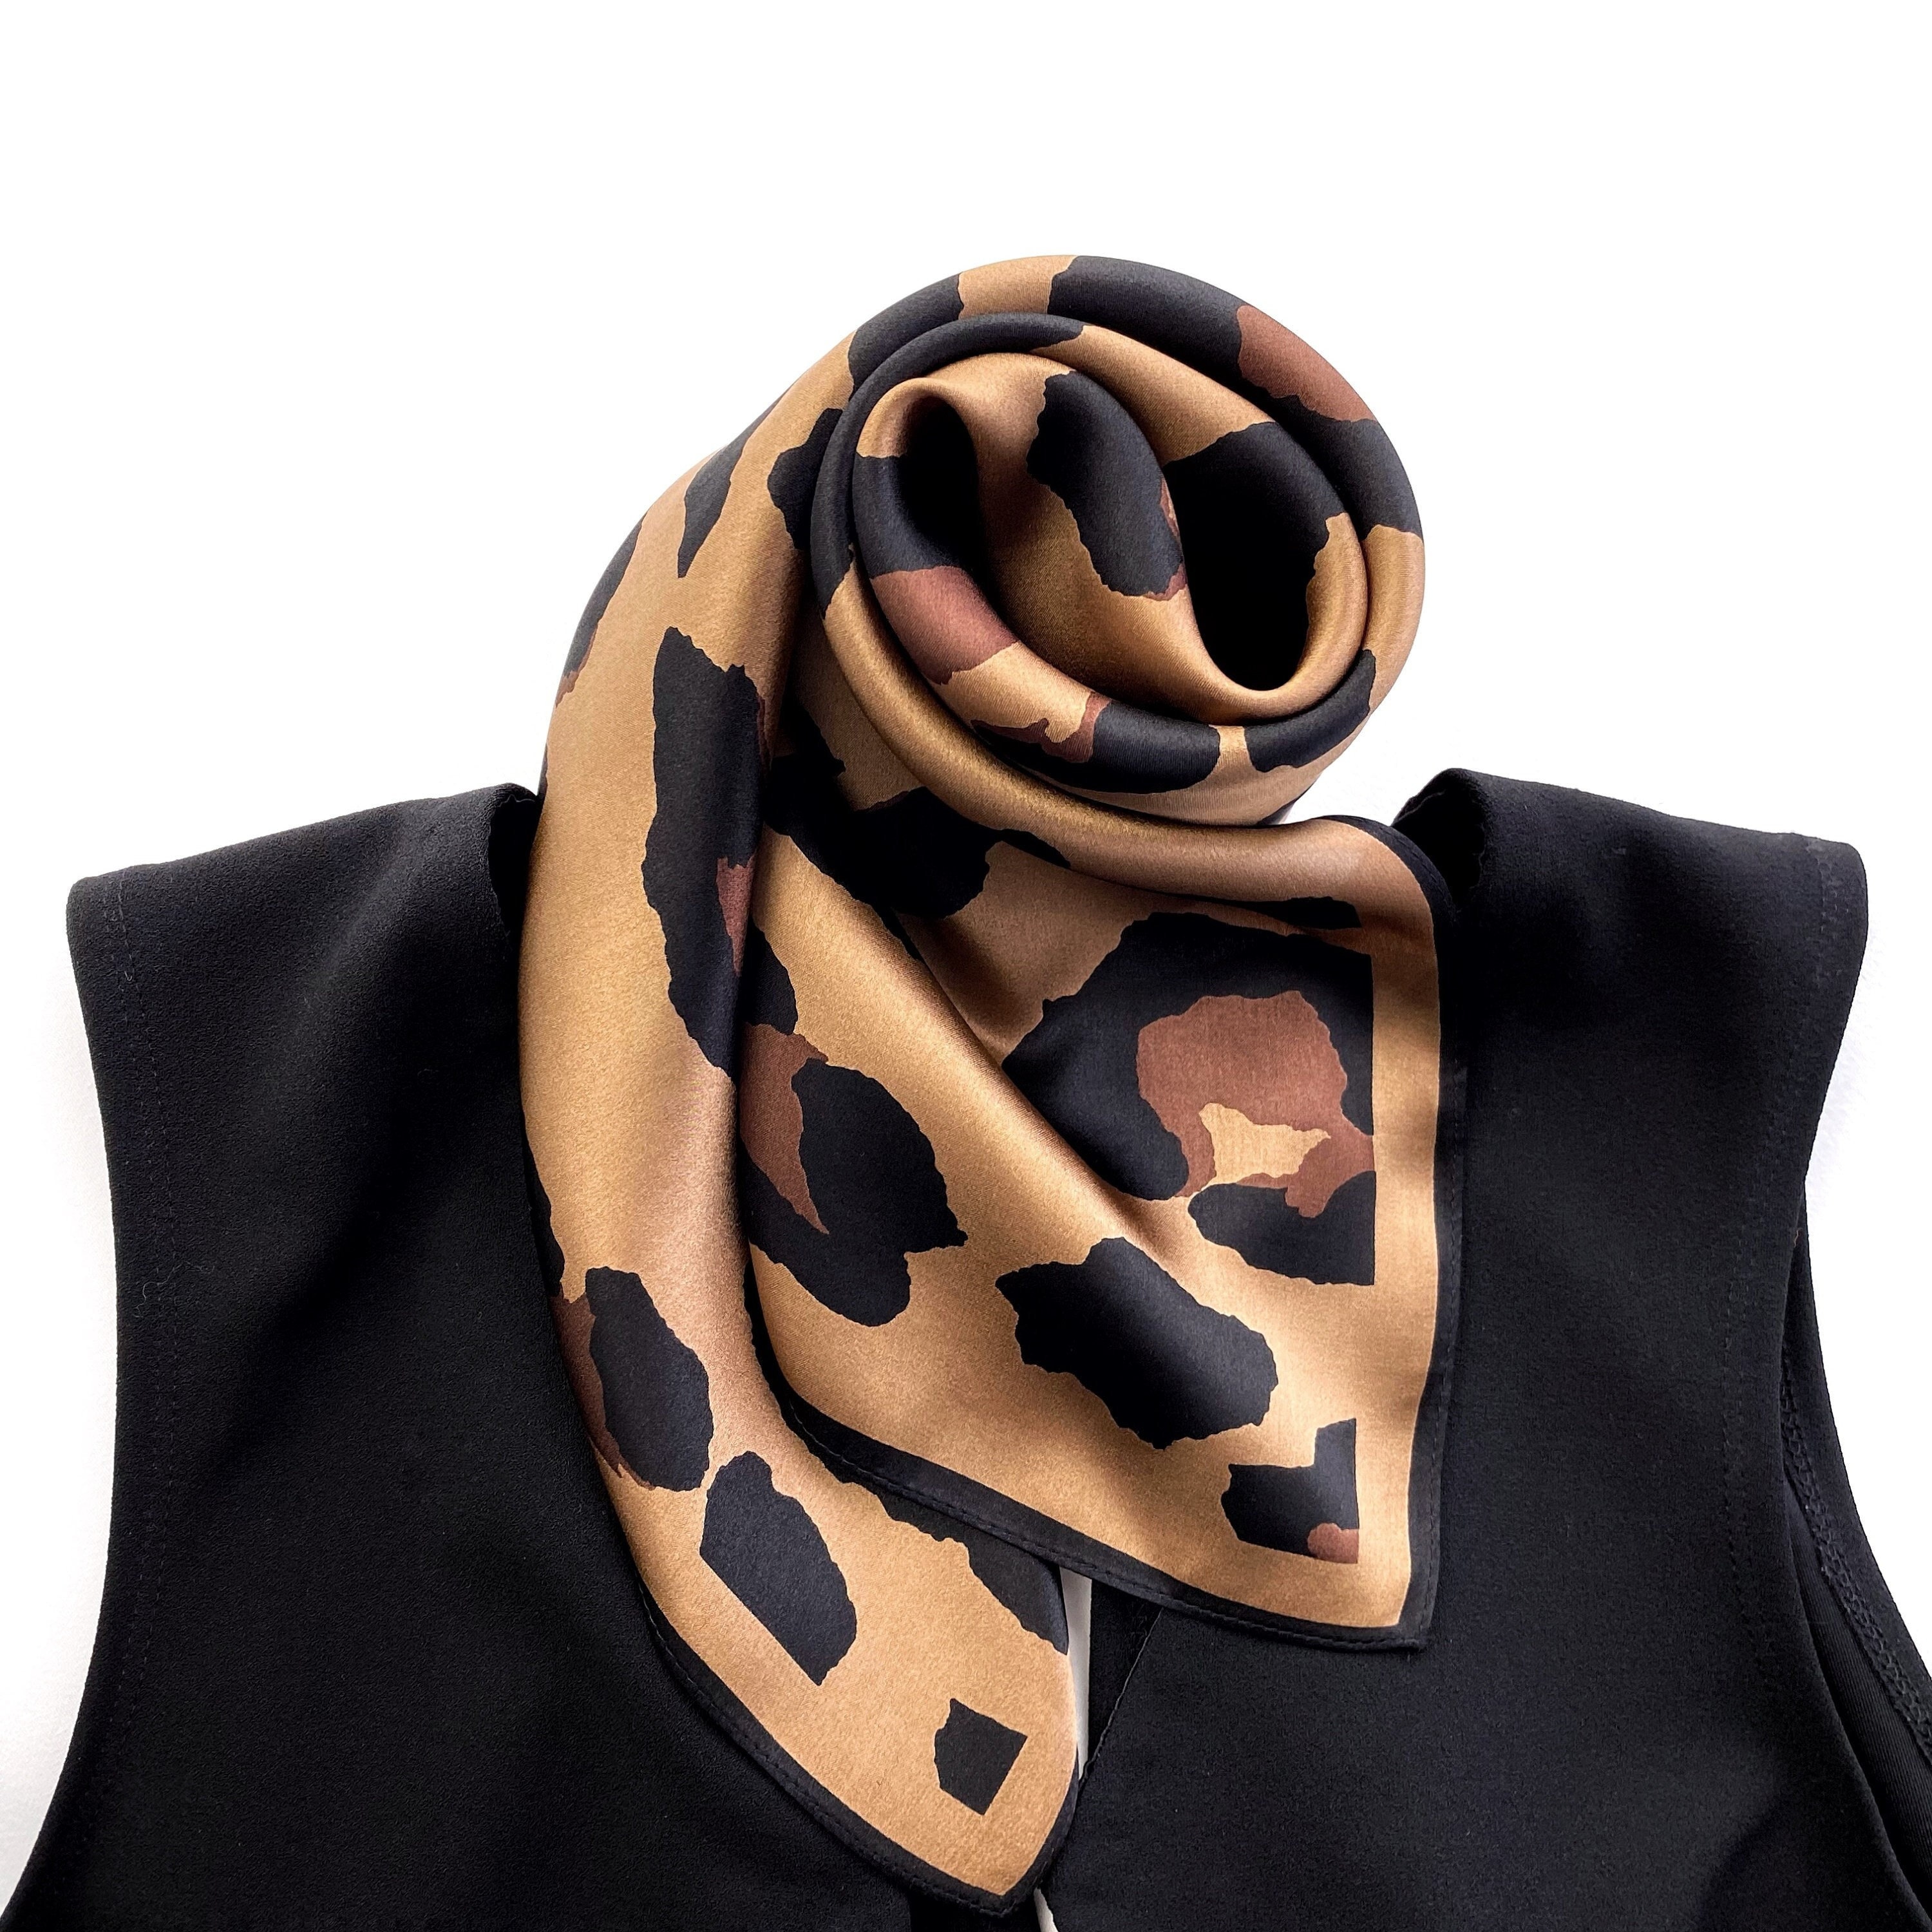 Designer Silk Satin Small Silk Scarf For Women Lightweight, Square, And  Medium Length With Animal Print And Dot Neckerchiefs From Fashion21588,  $7.98